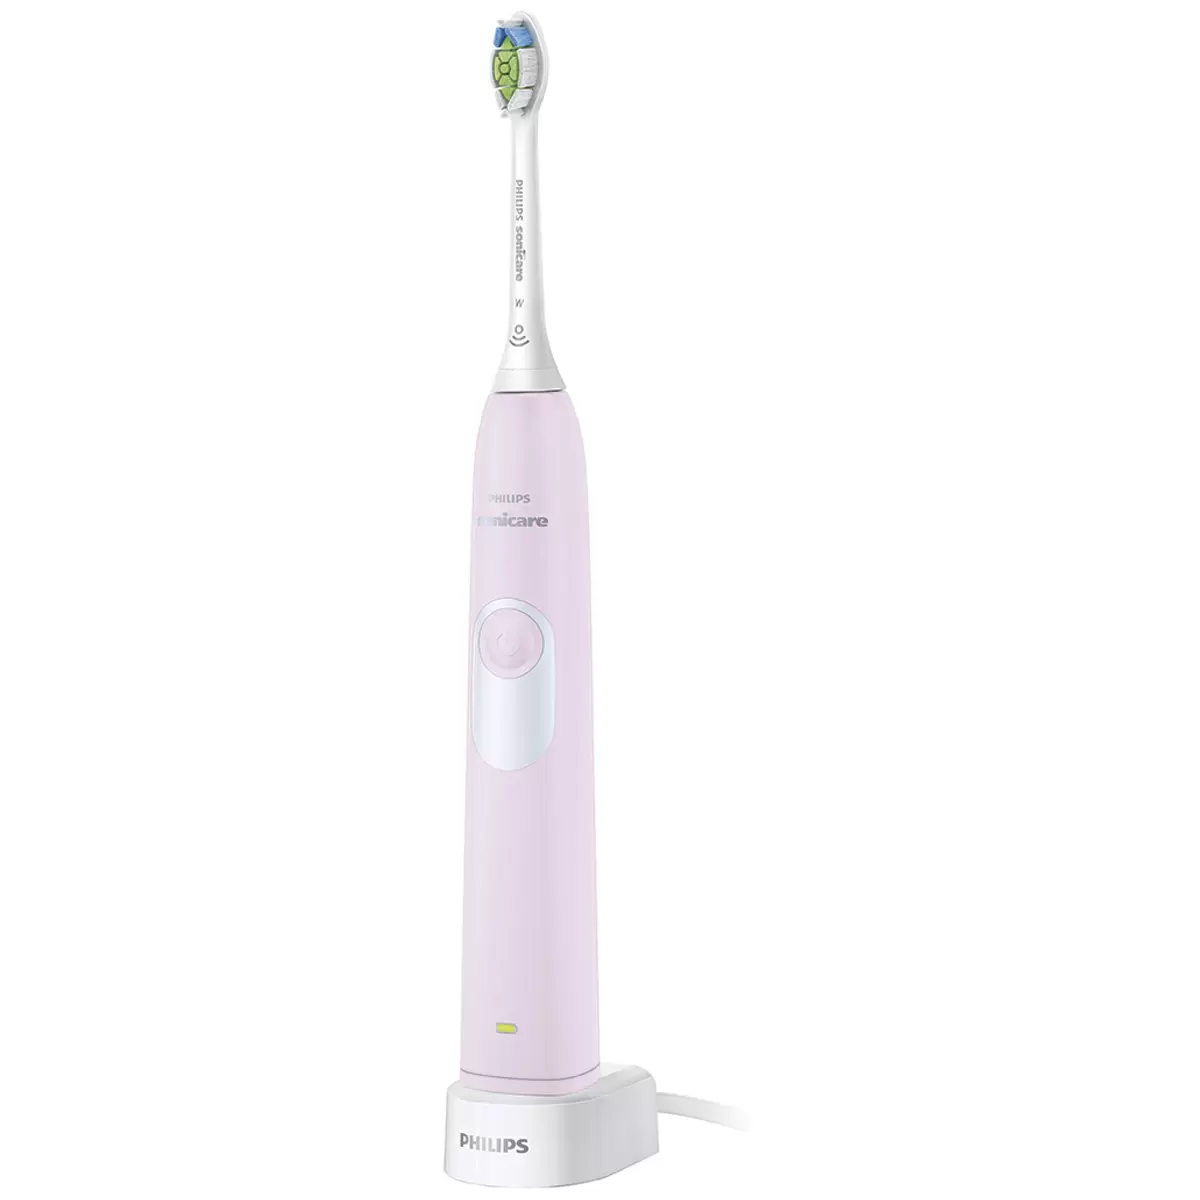 Philips Sonicare 2 Series Electric Toothbrush 2 Pack HX6232/74